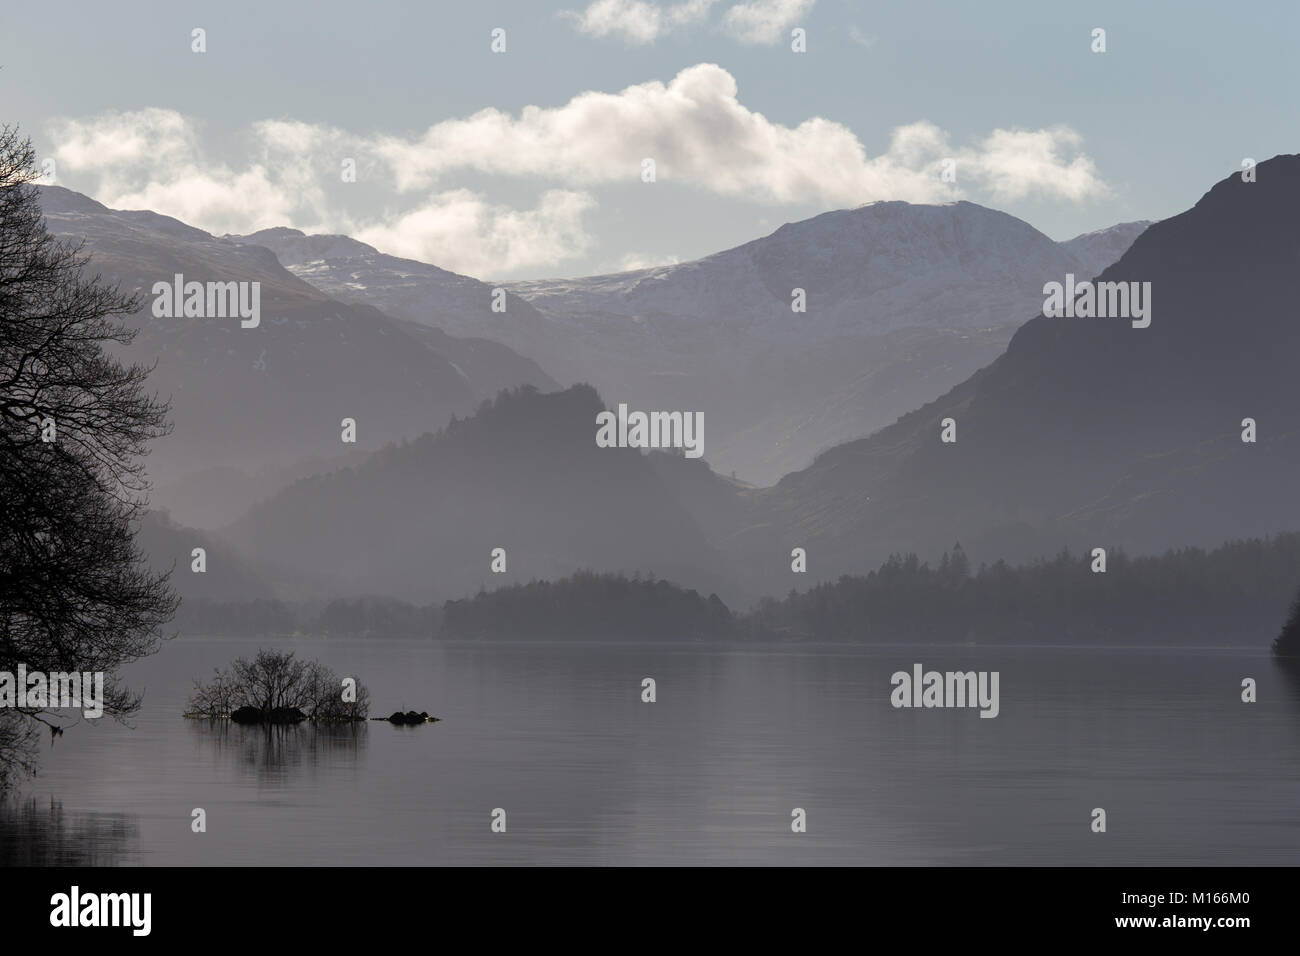 Derwent Water near Keswick, in the English Lake District National Park on a misty/hazy winters day Stock Photo